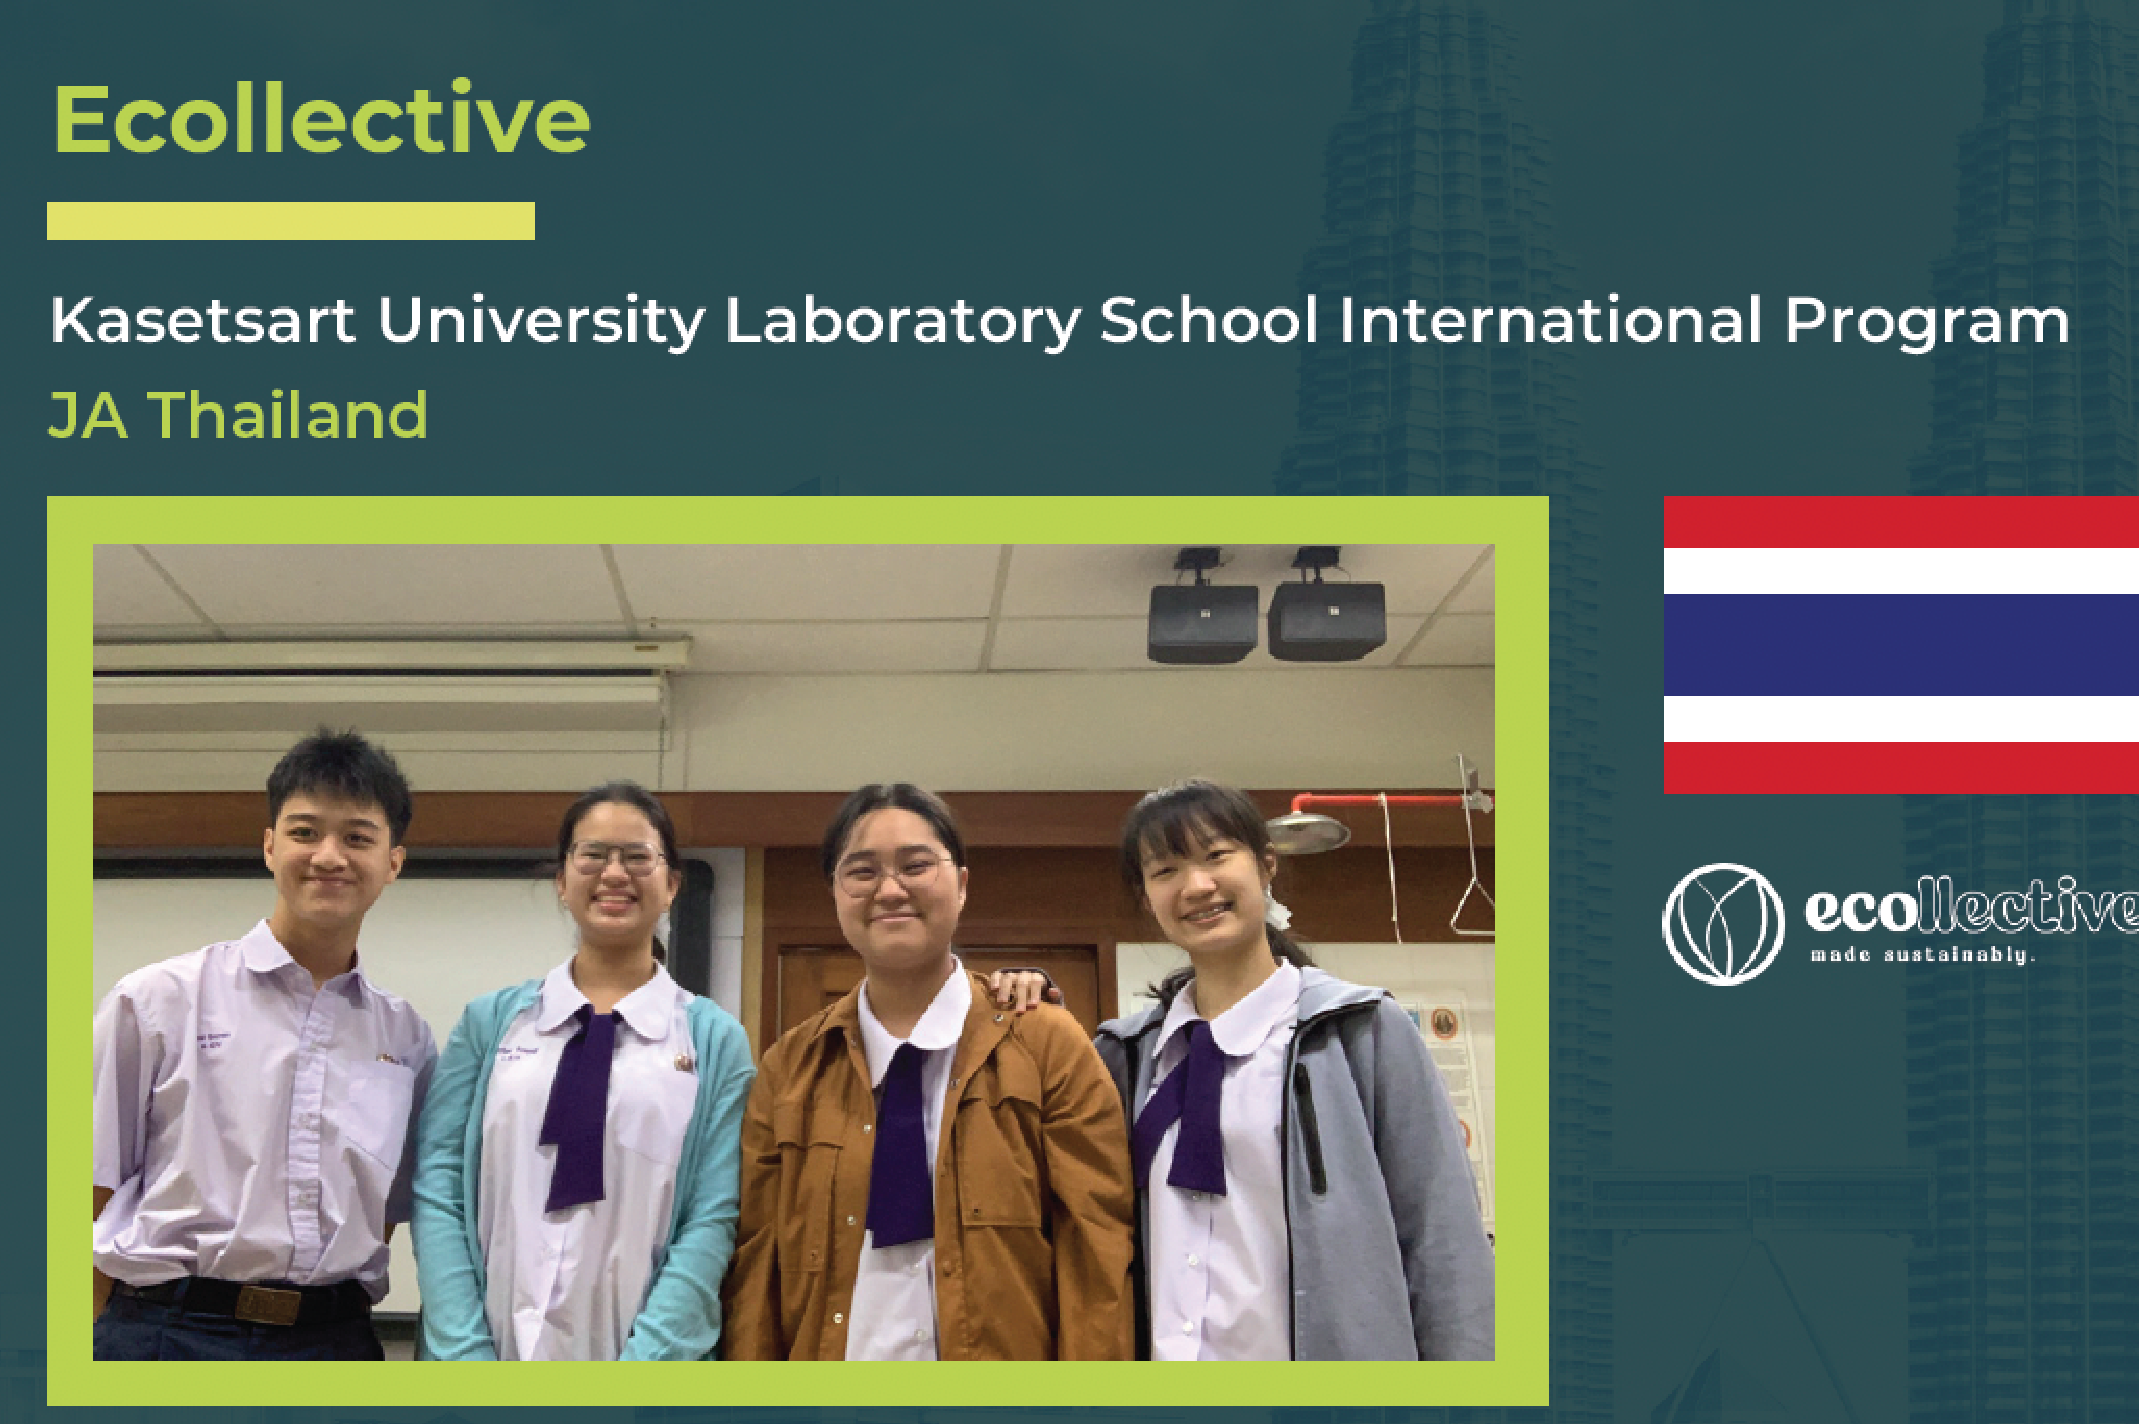 COYC_Thailand - Ecollective.png